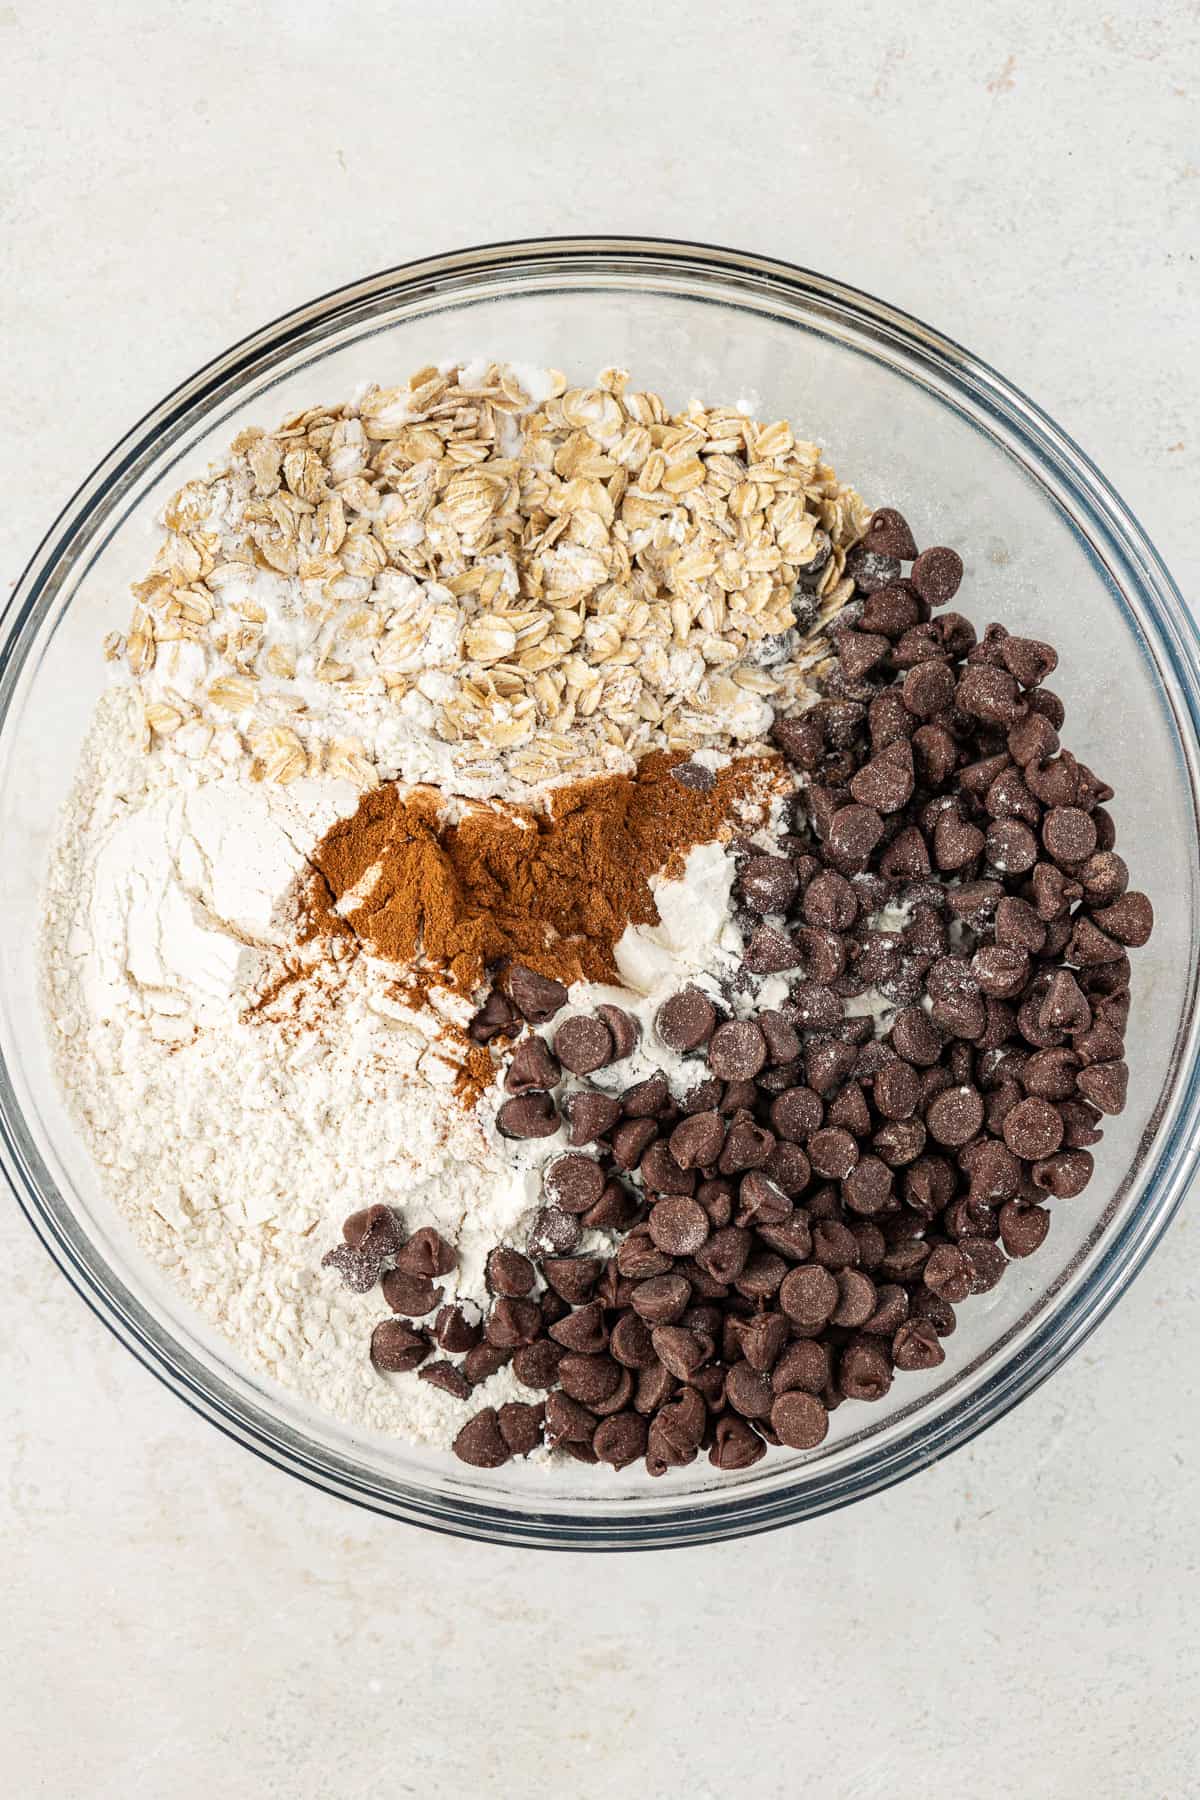 dry ingredients for oatmeal chocolate chip cookies in a clear glass bowl including flour, cinnamon, oats and chocolate chips